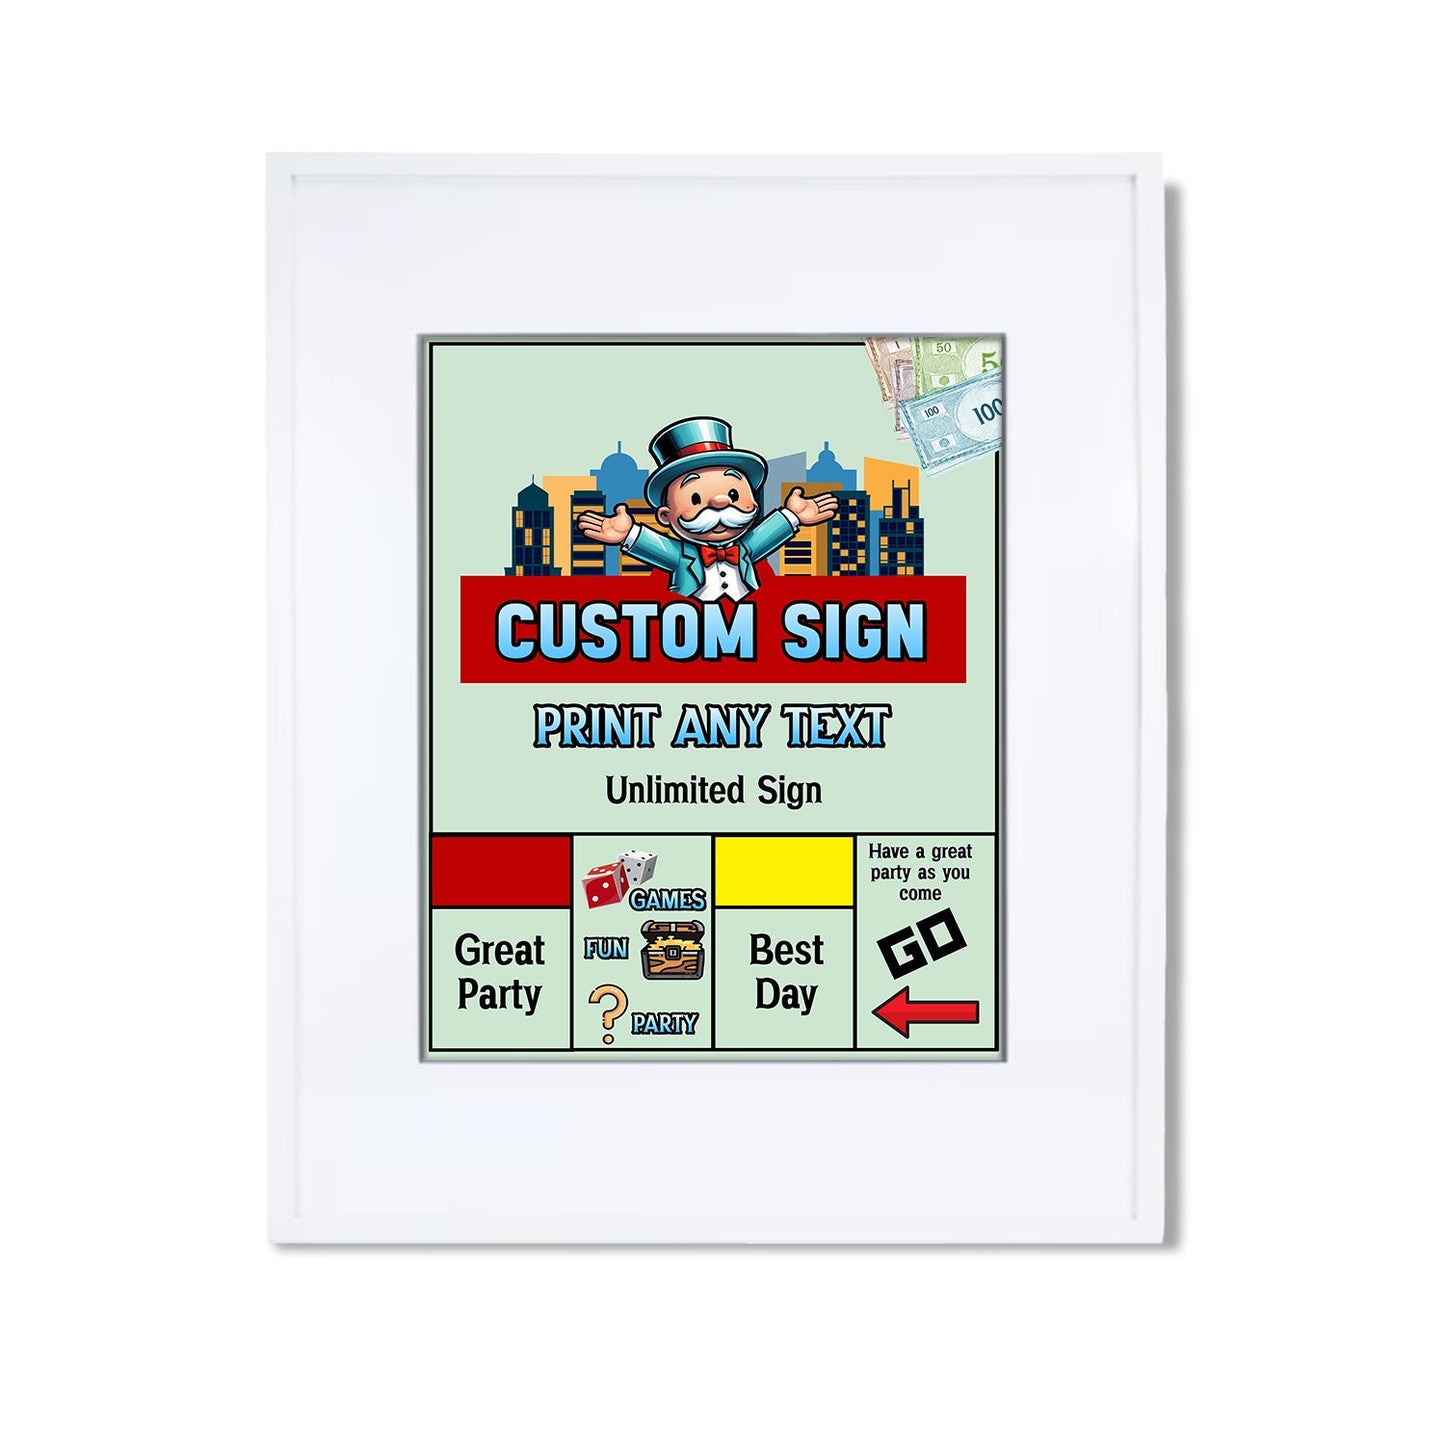 Custom sign featuring Monopoly Go theme